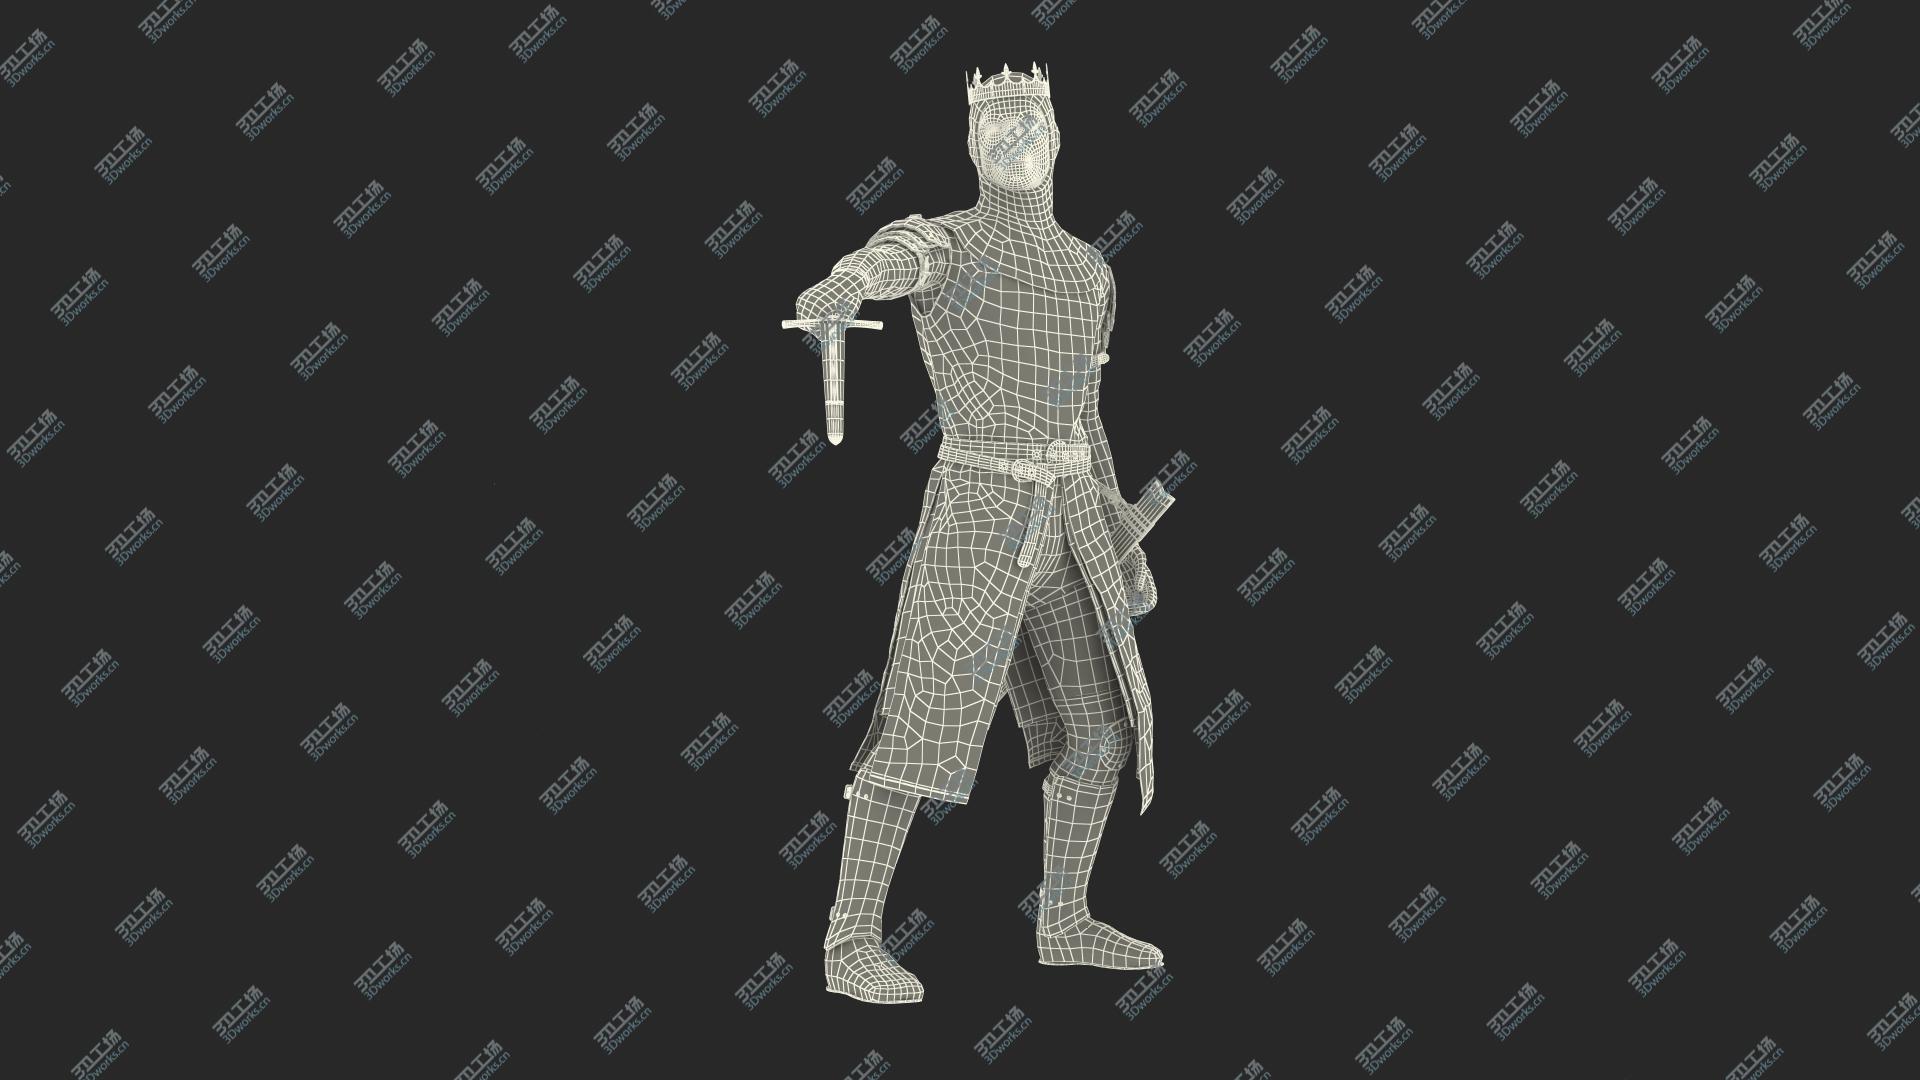 images/goods_img/202104093/Crusader Knight King with Sword 3D model/3.jpg